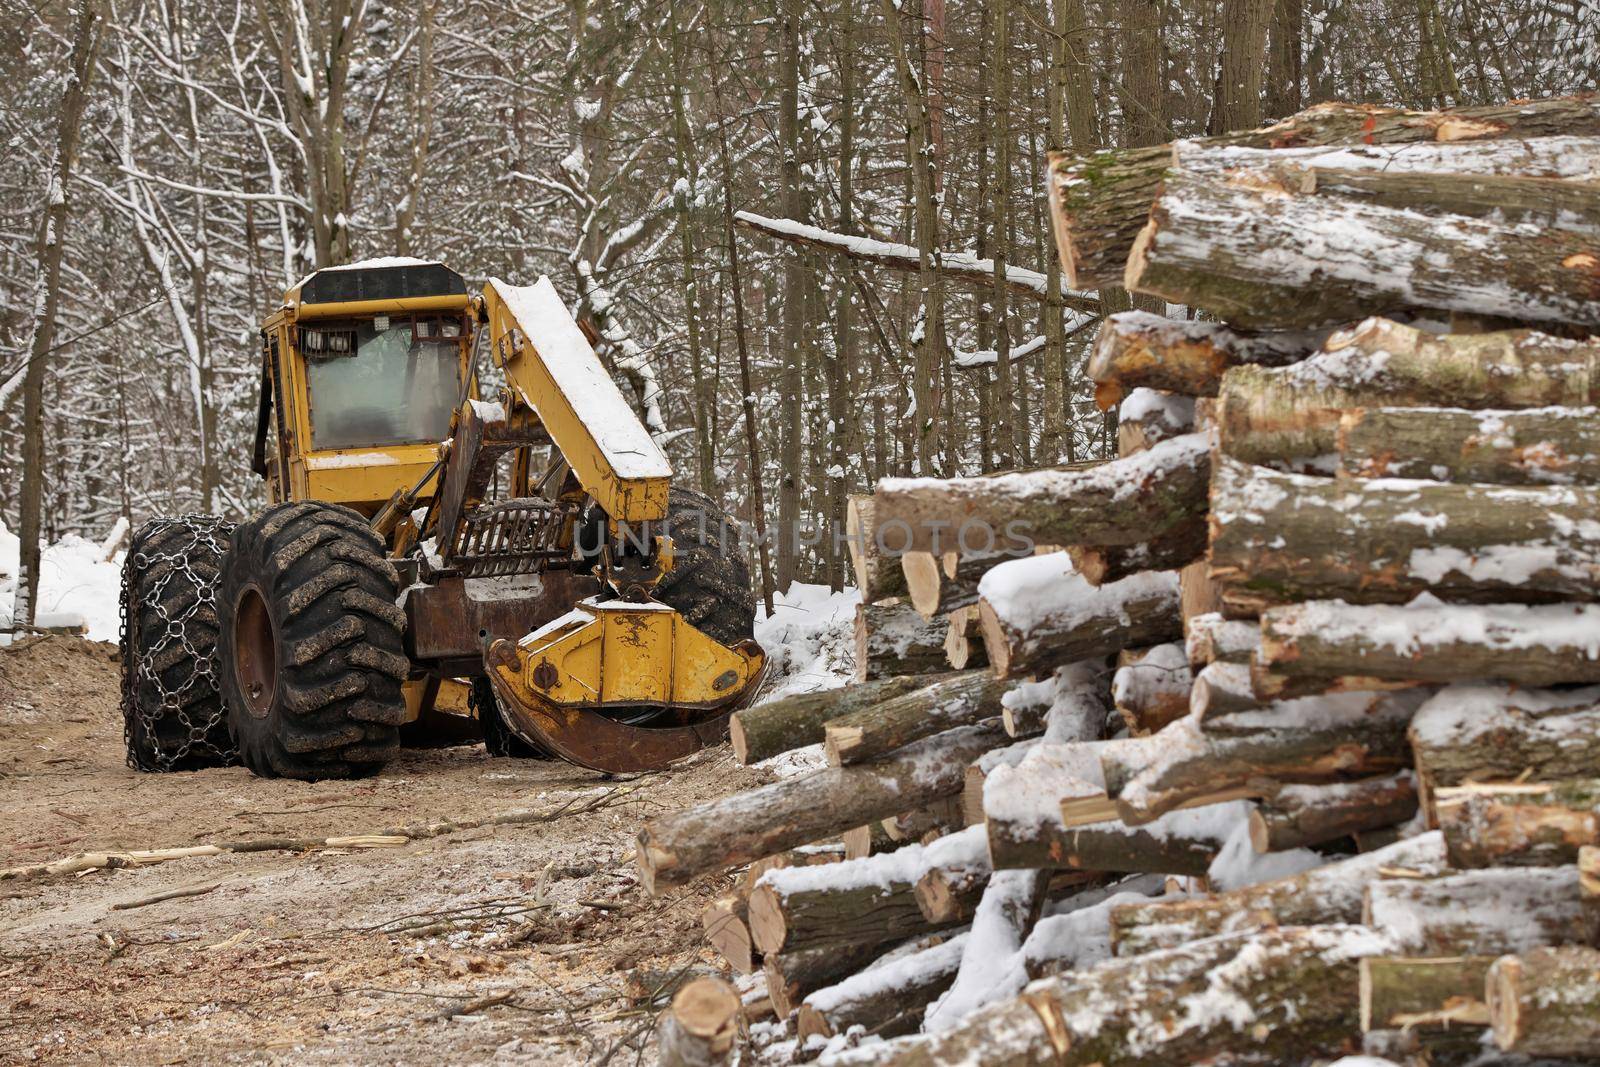 Log or Logging Skidder with Freshly Harvested and piled timber logs by Forest in Winter. High quality photo.